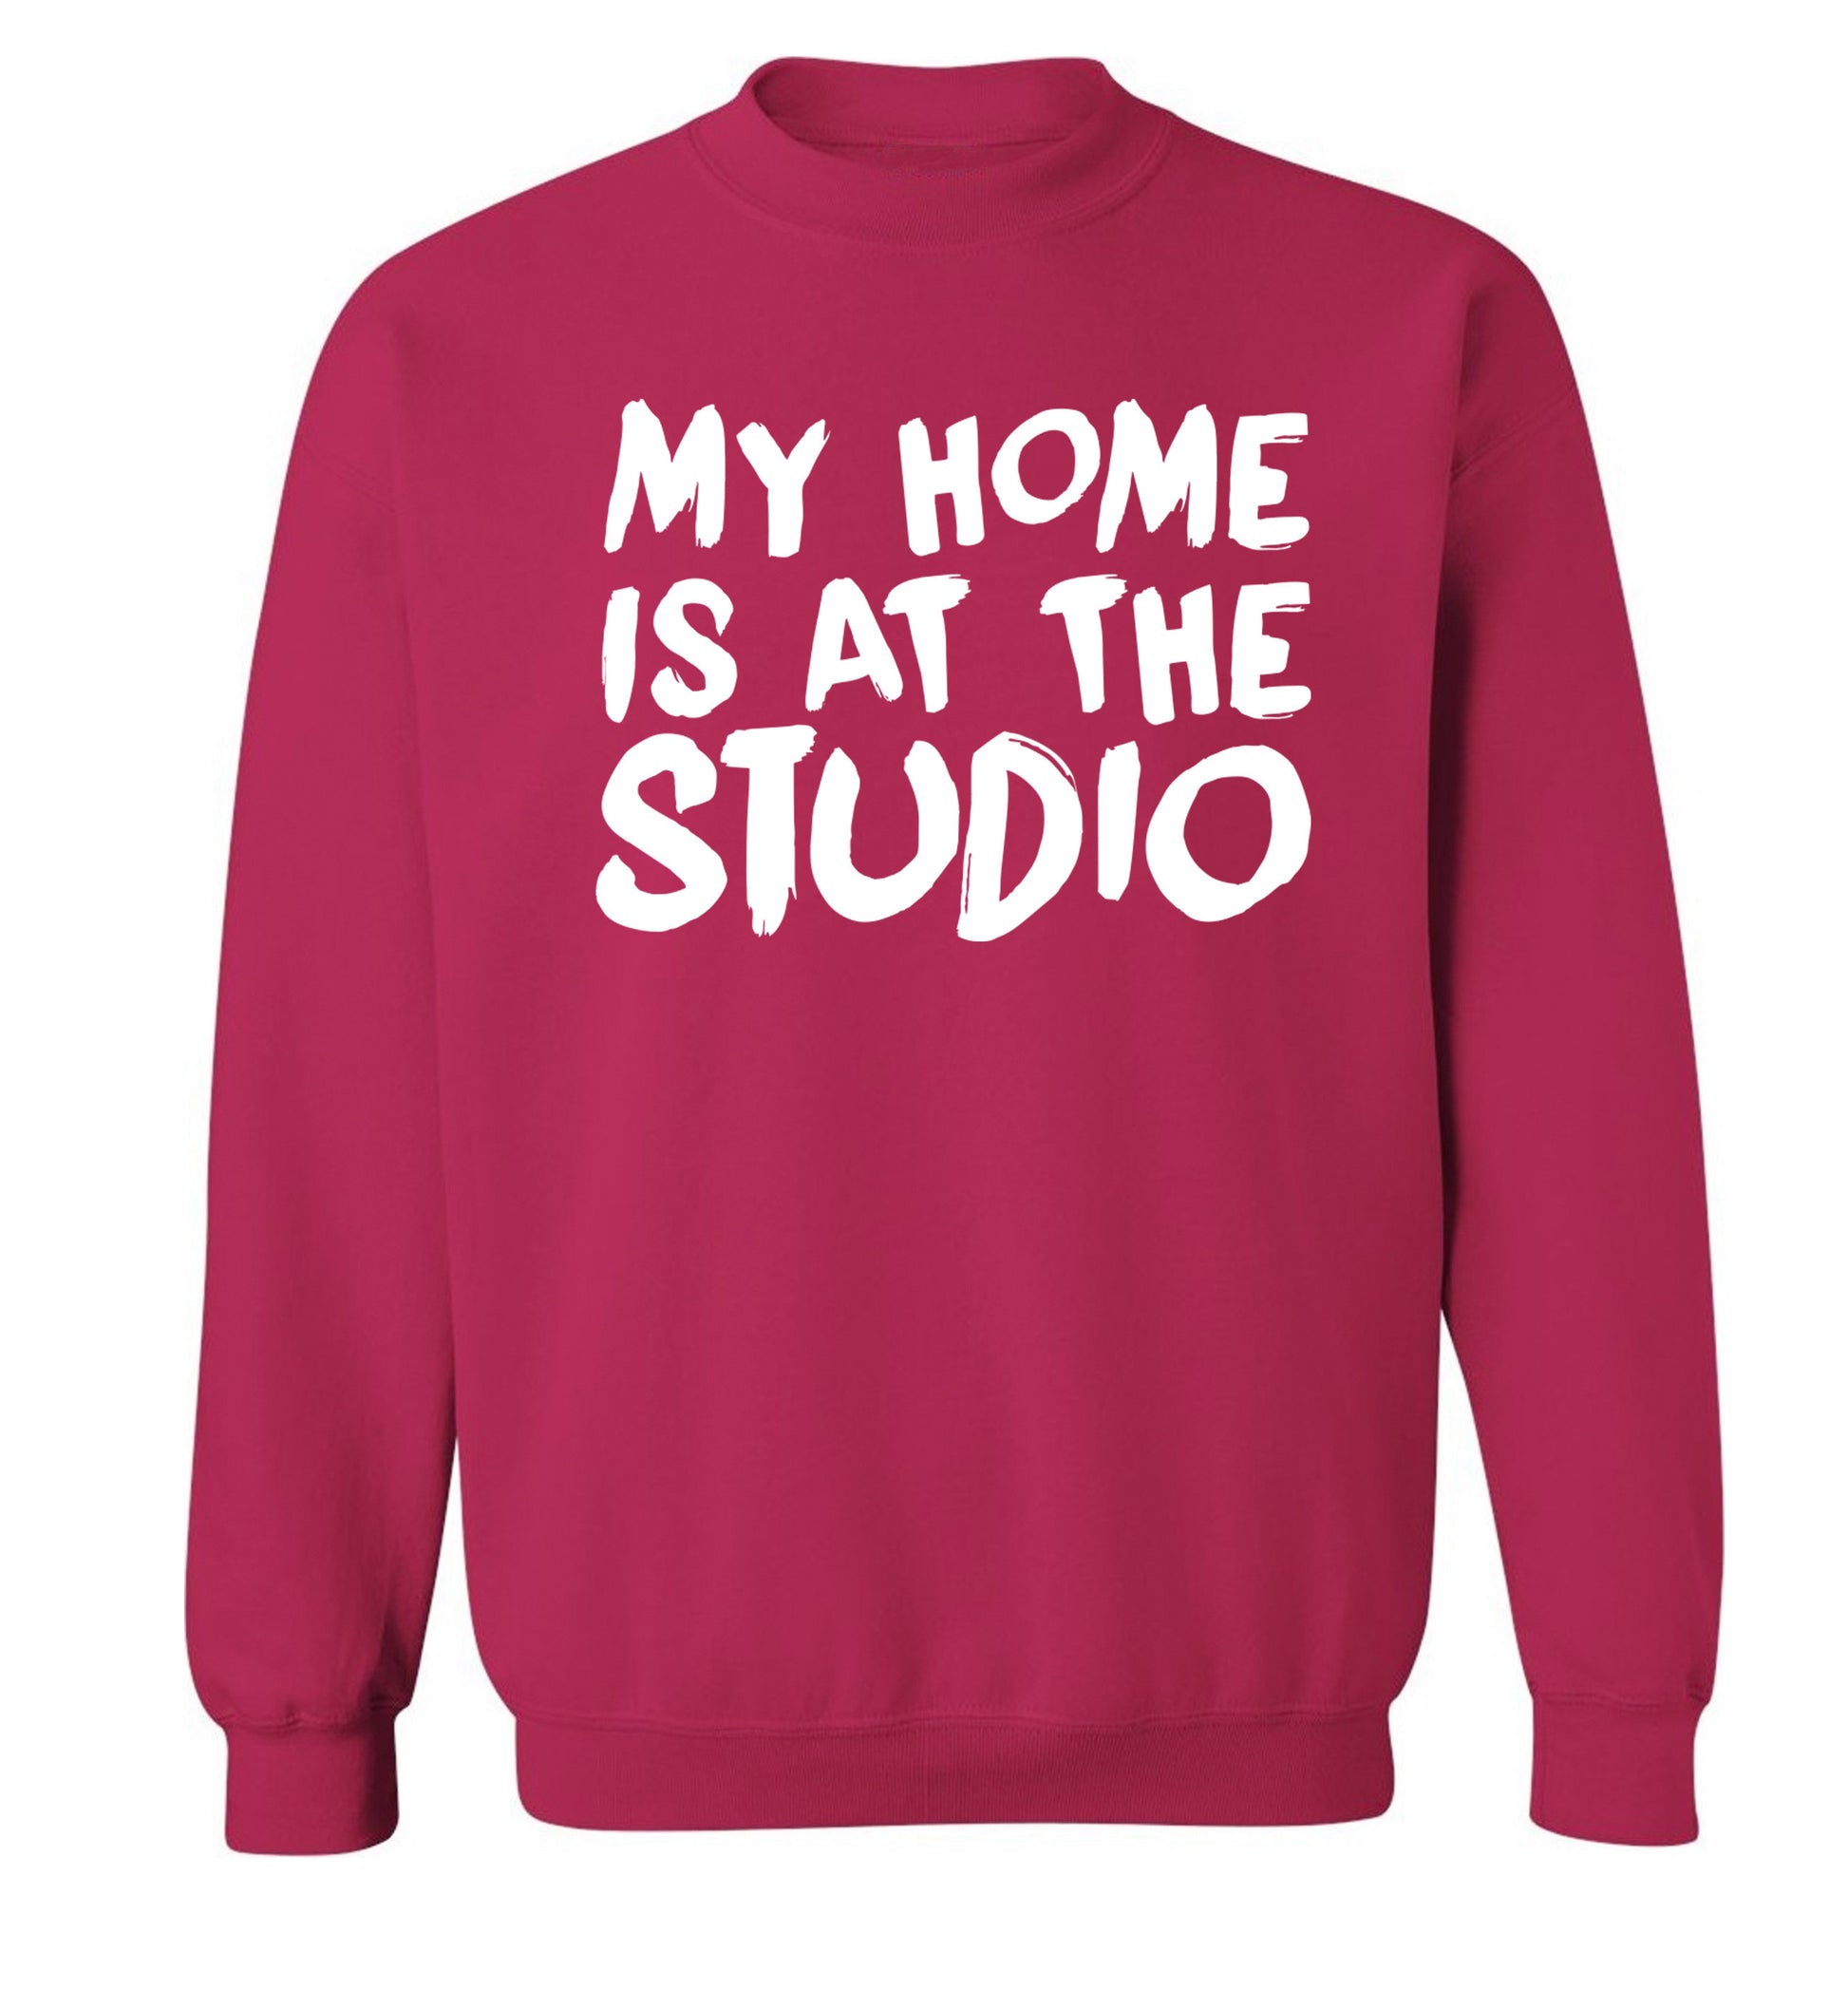 My home is at the studio Adult's unisex pink Sweater 2XL